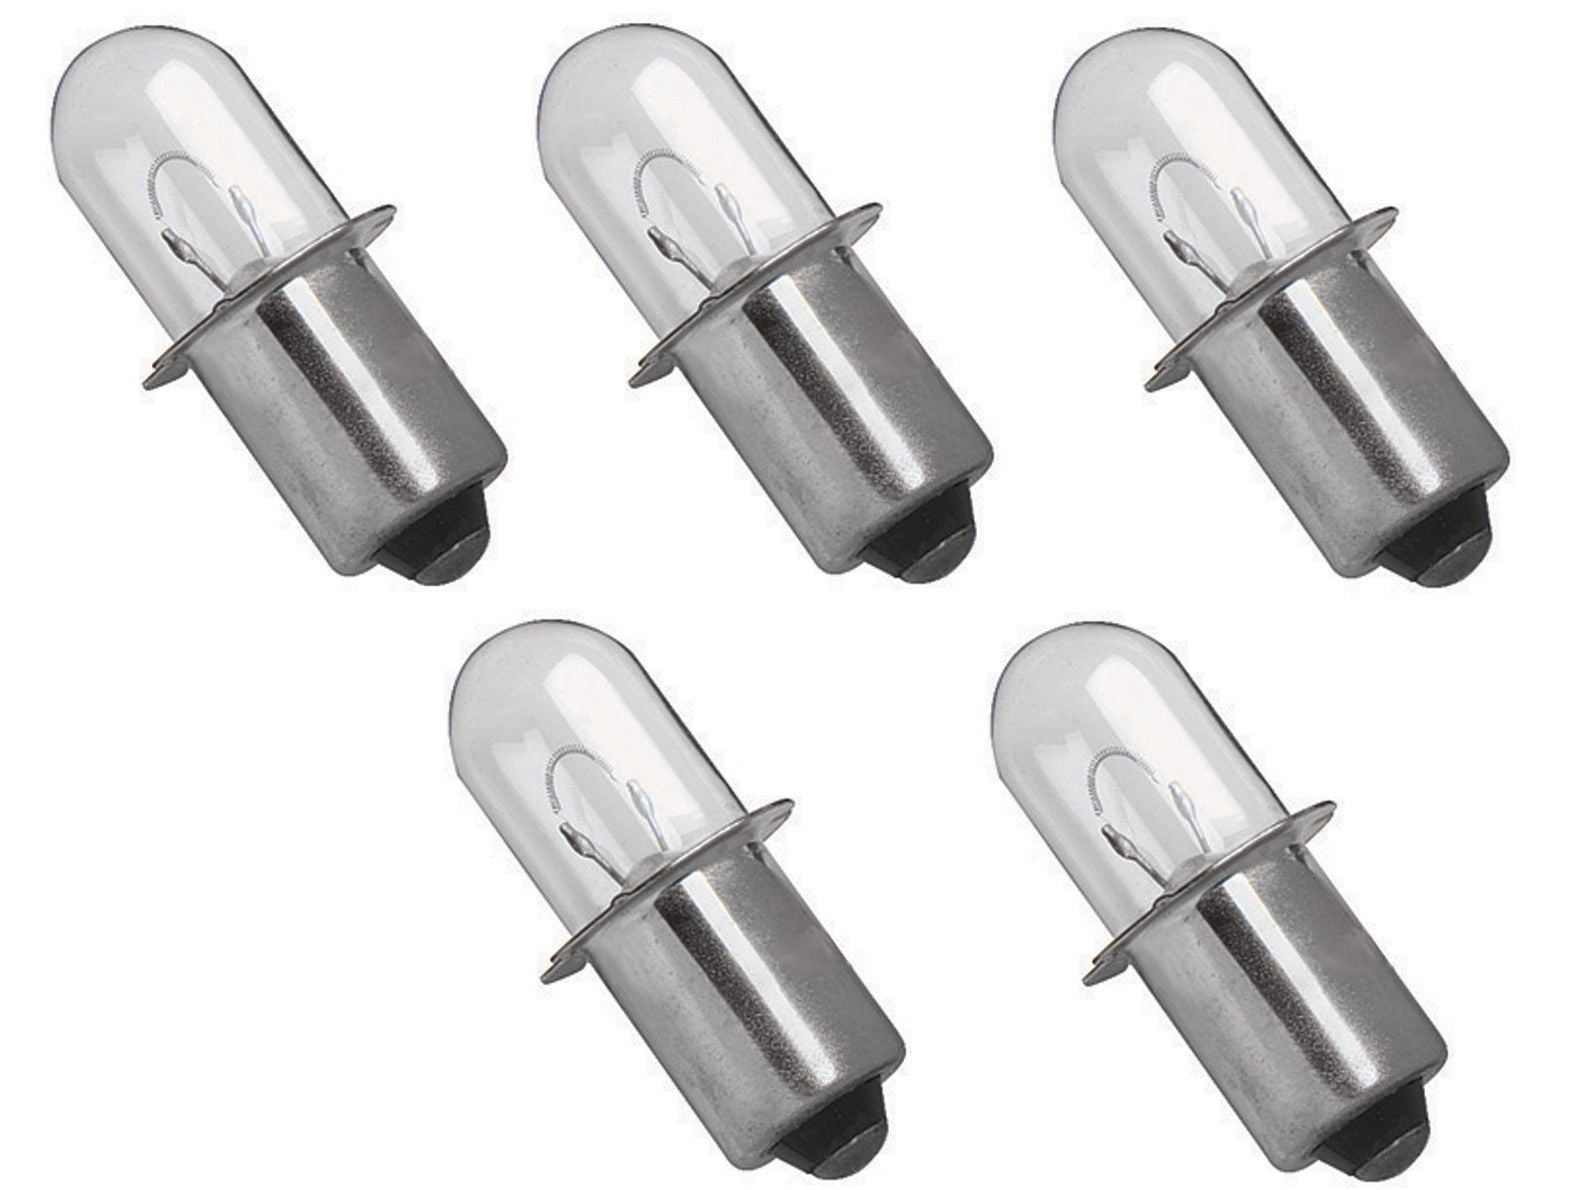 19.2 v Volt Xenon Flashlight Replacement Bulbs for Porter Cable #881 #8419 2 